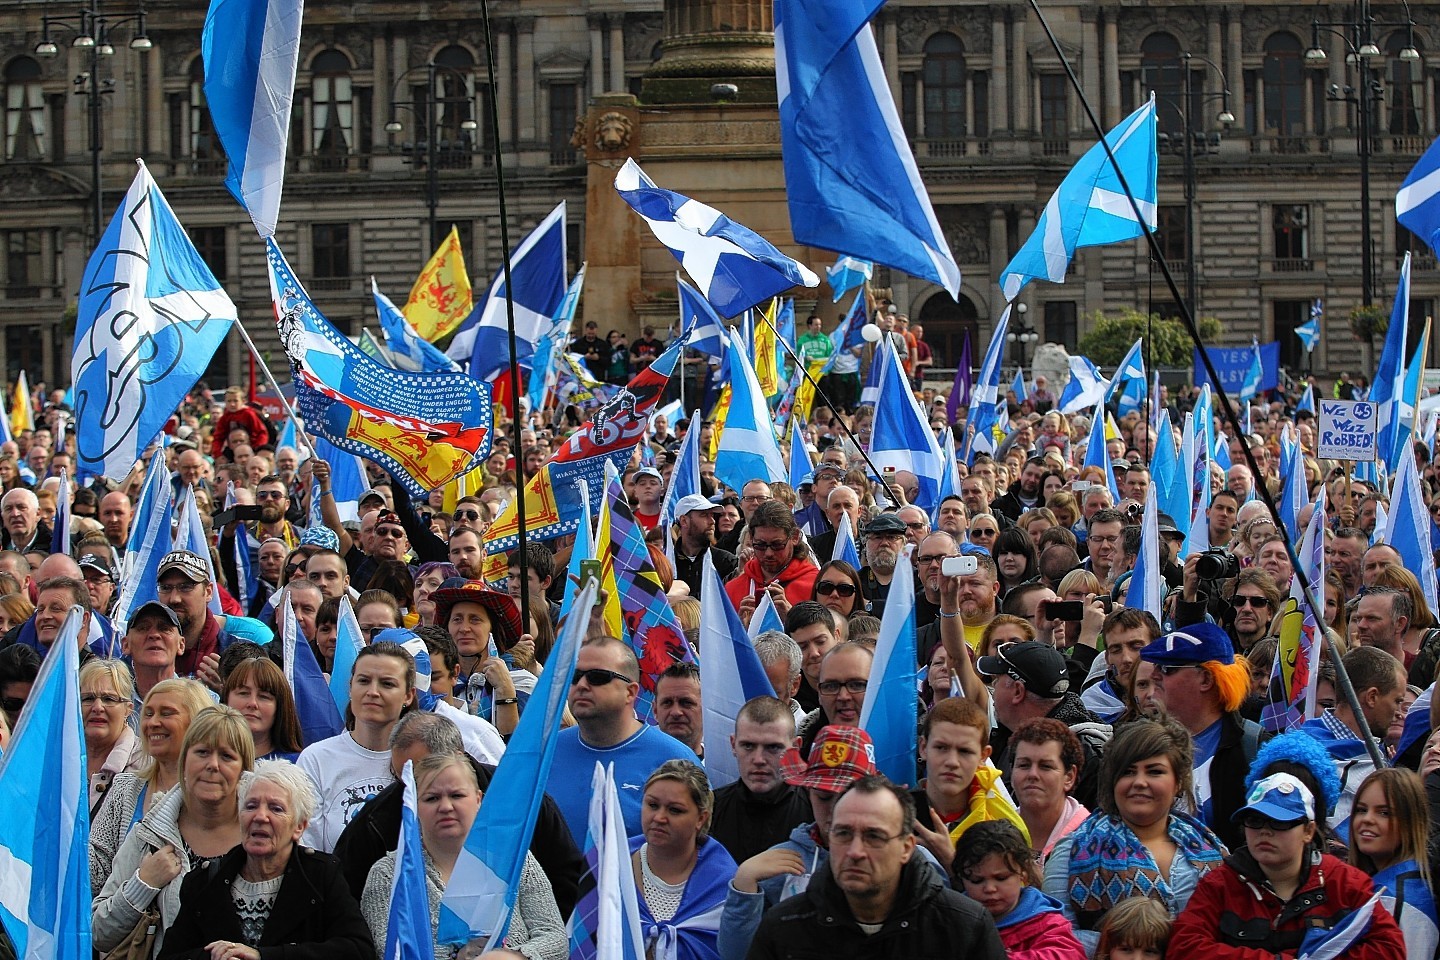 The pro-independence rally in Glasgow's George Square